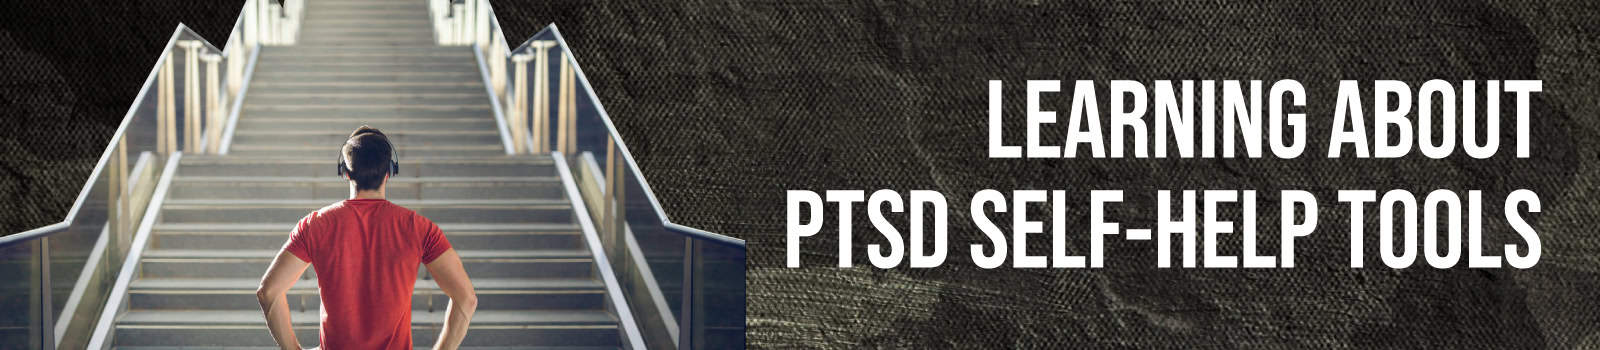 Learning About PTSD Self-Help Tools 